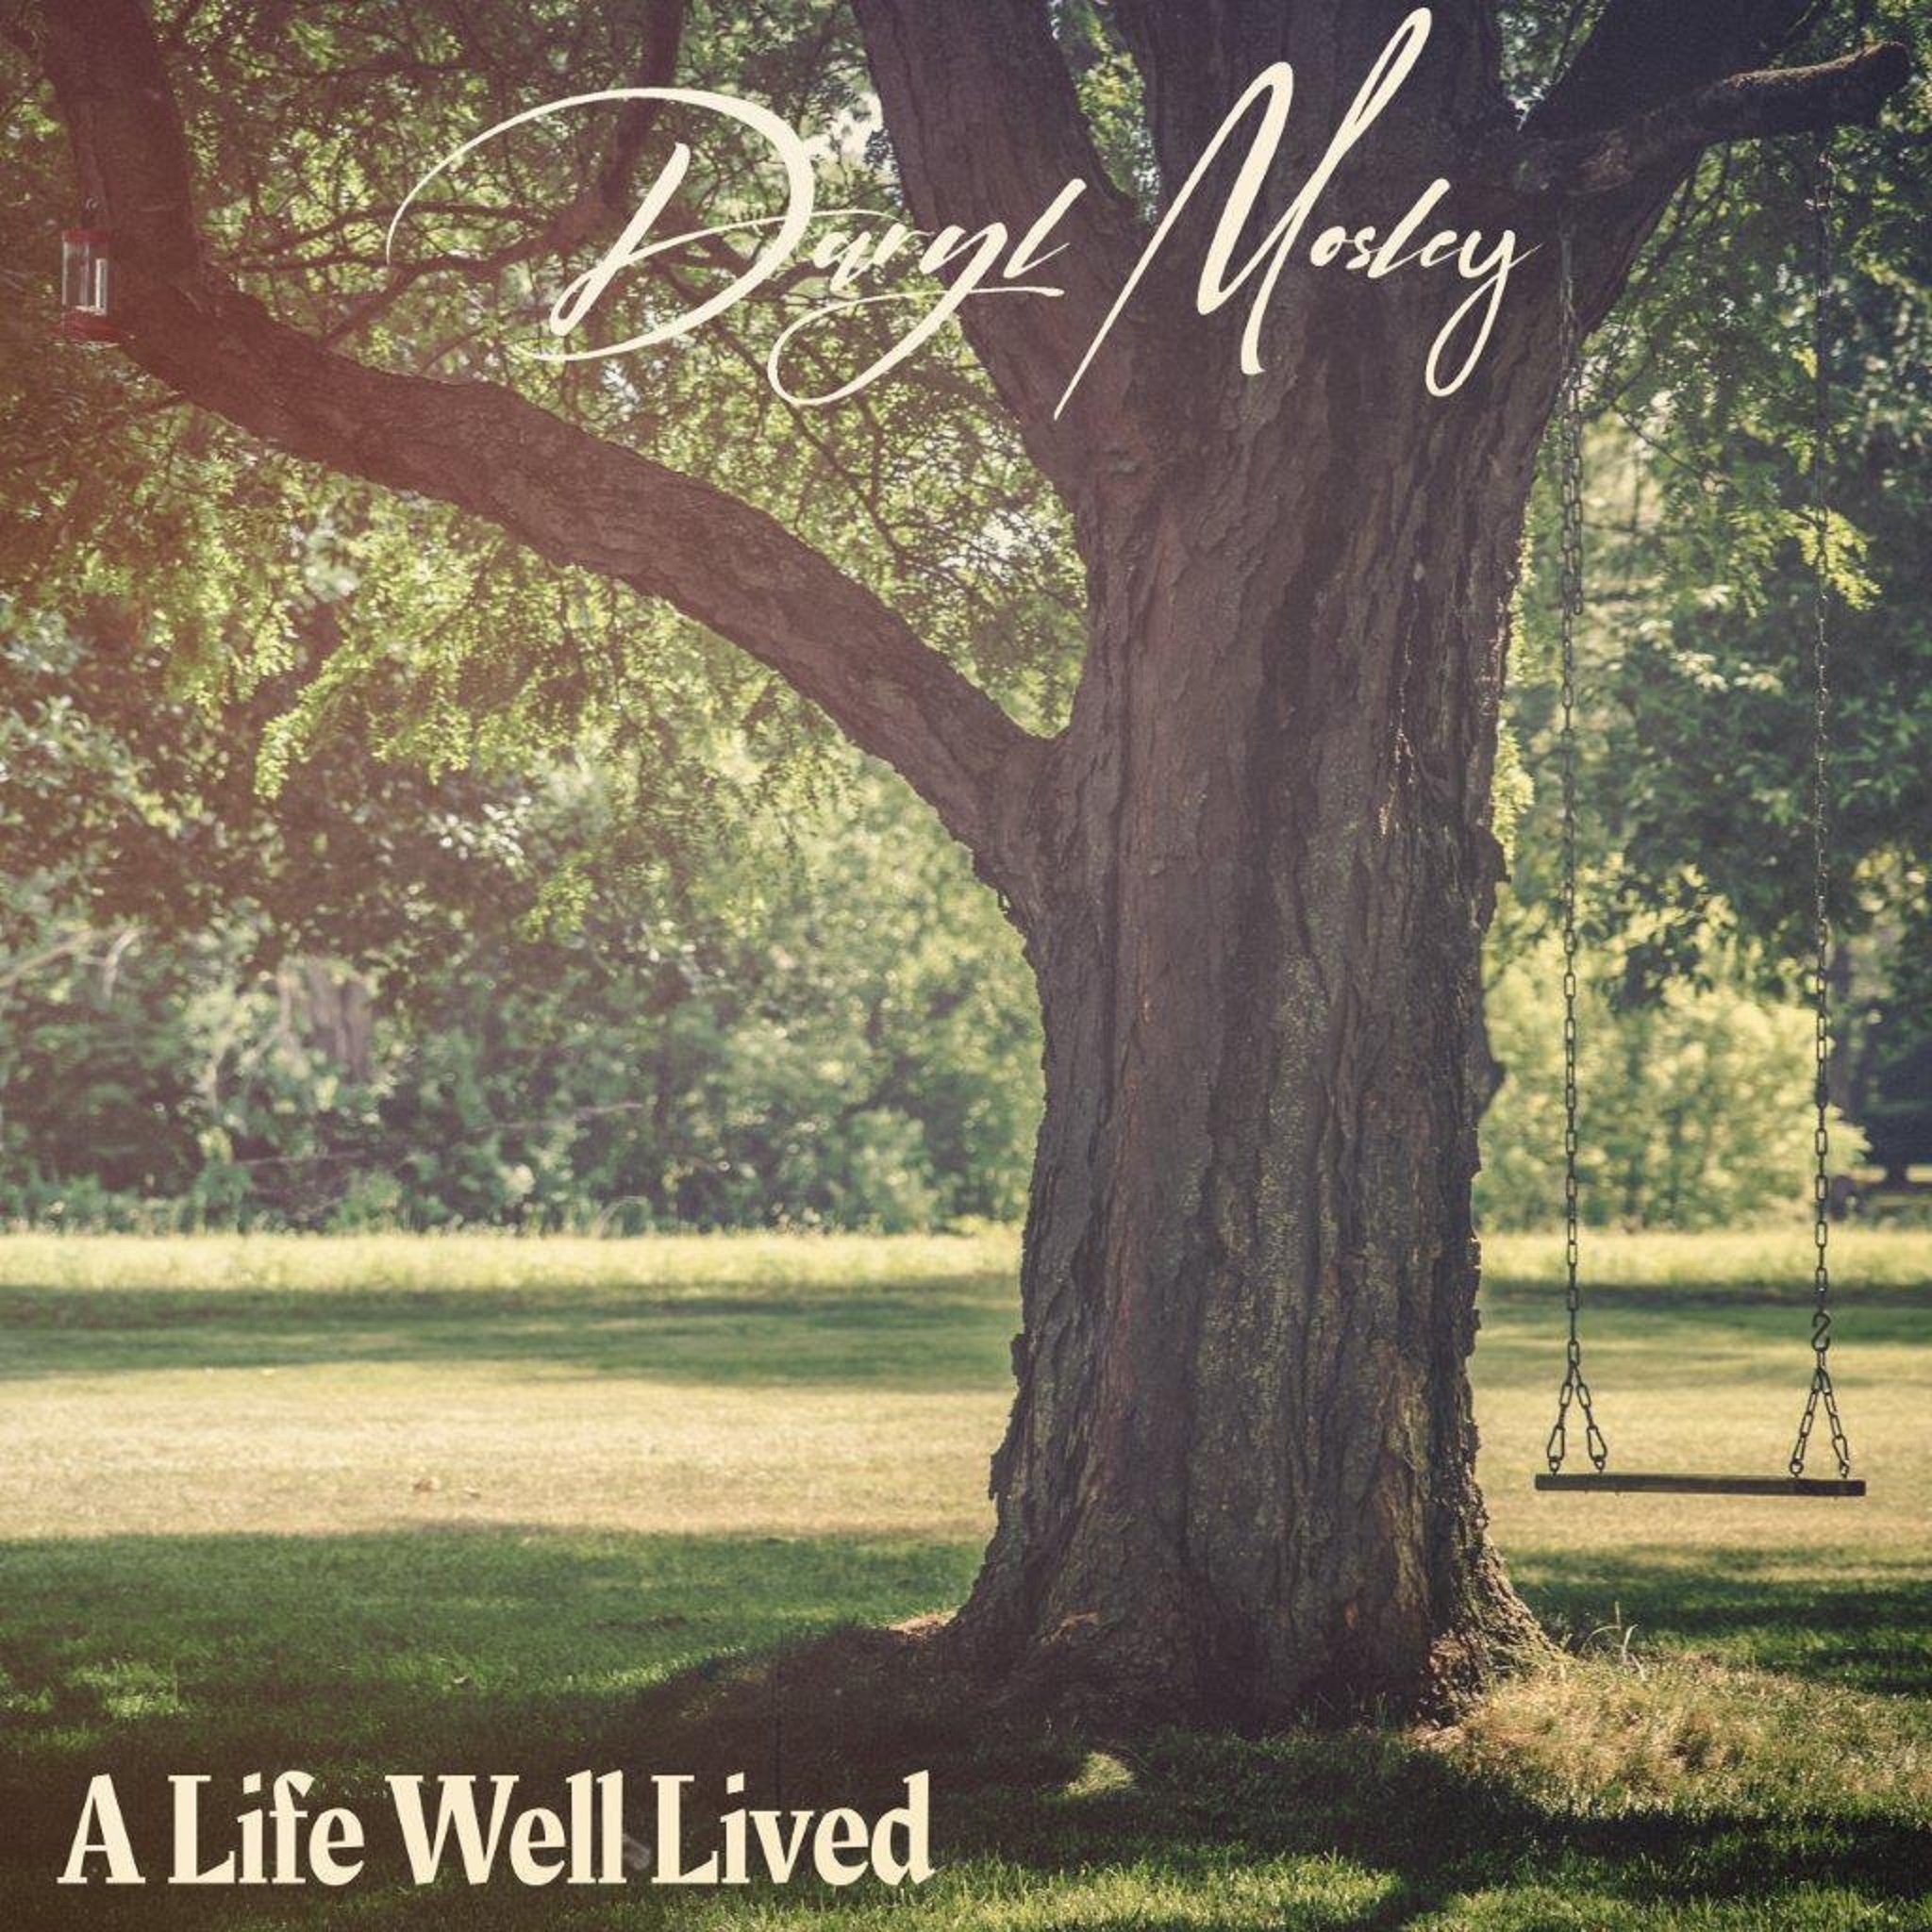 Daryl Mosley Shares Words Of Wisdom With New Single, “A Life Well Lived”